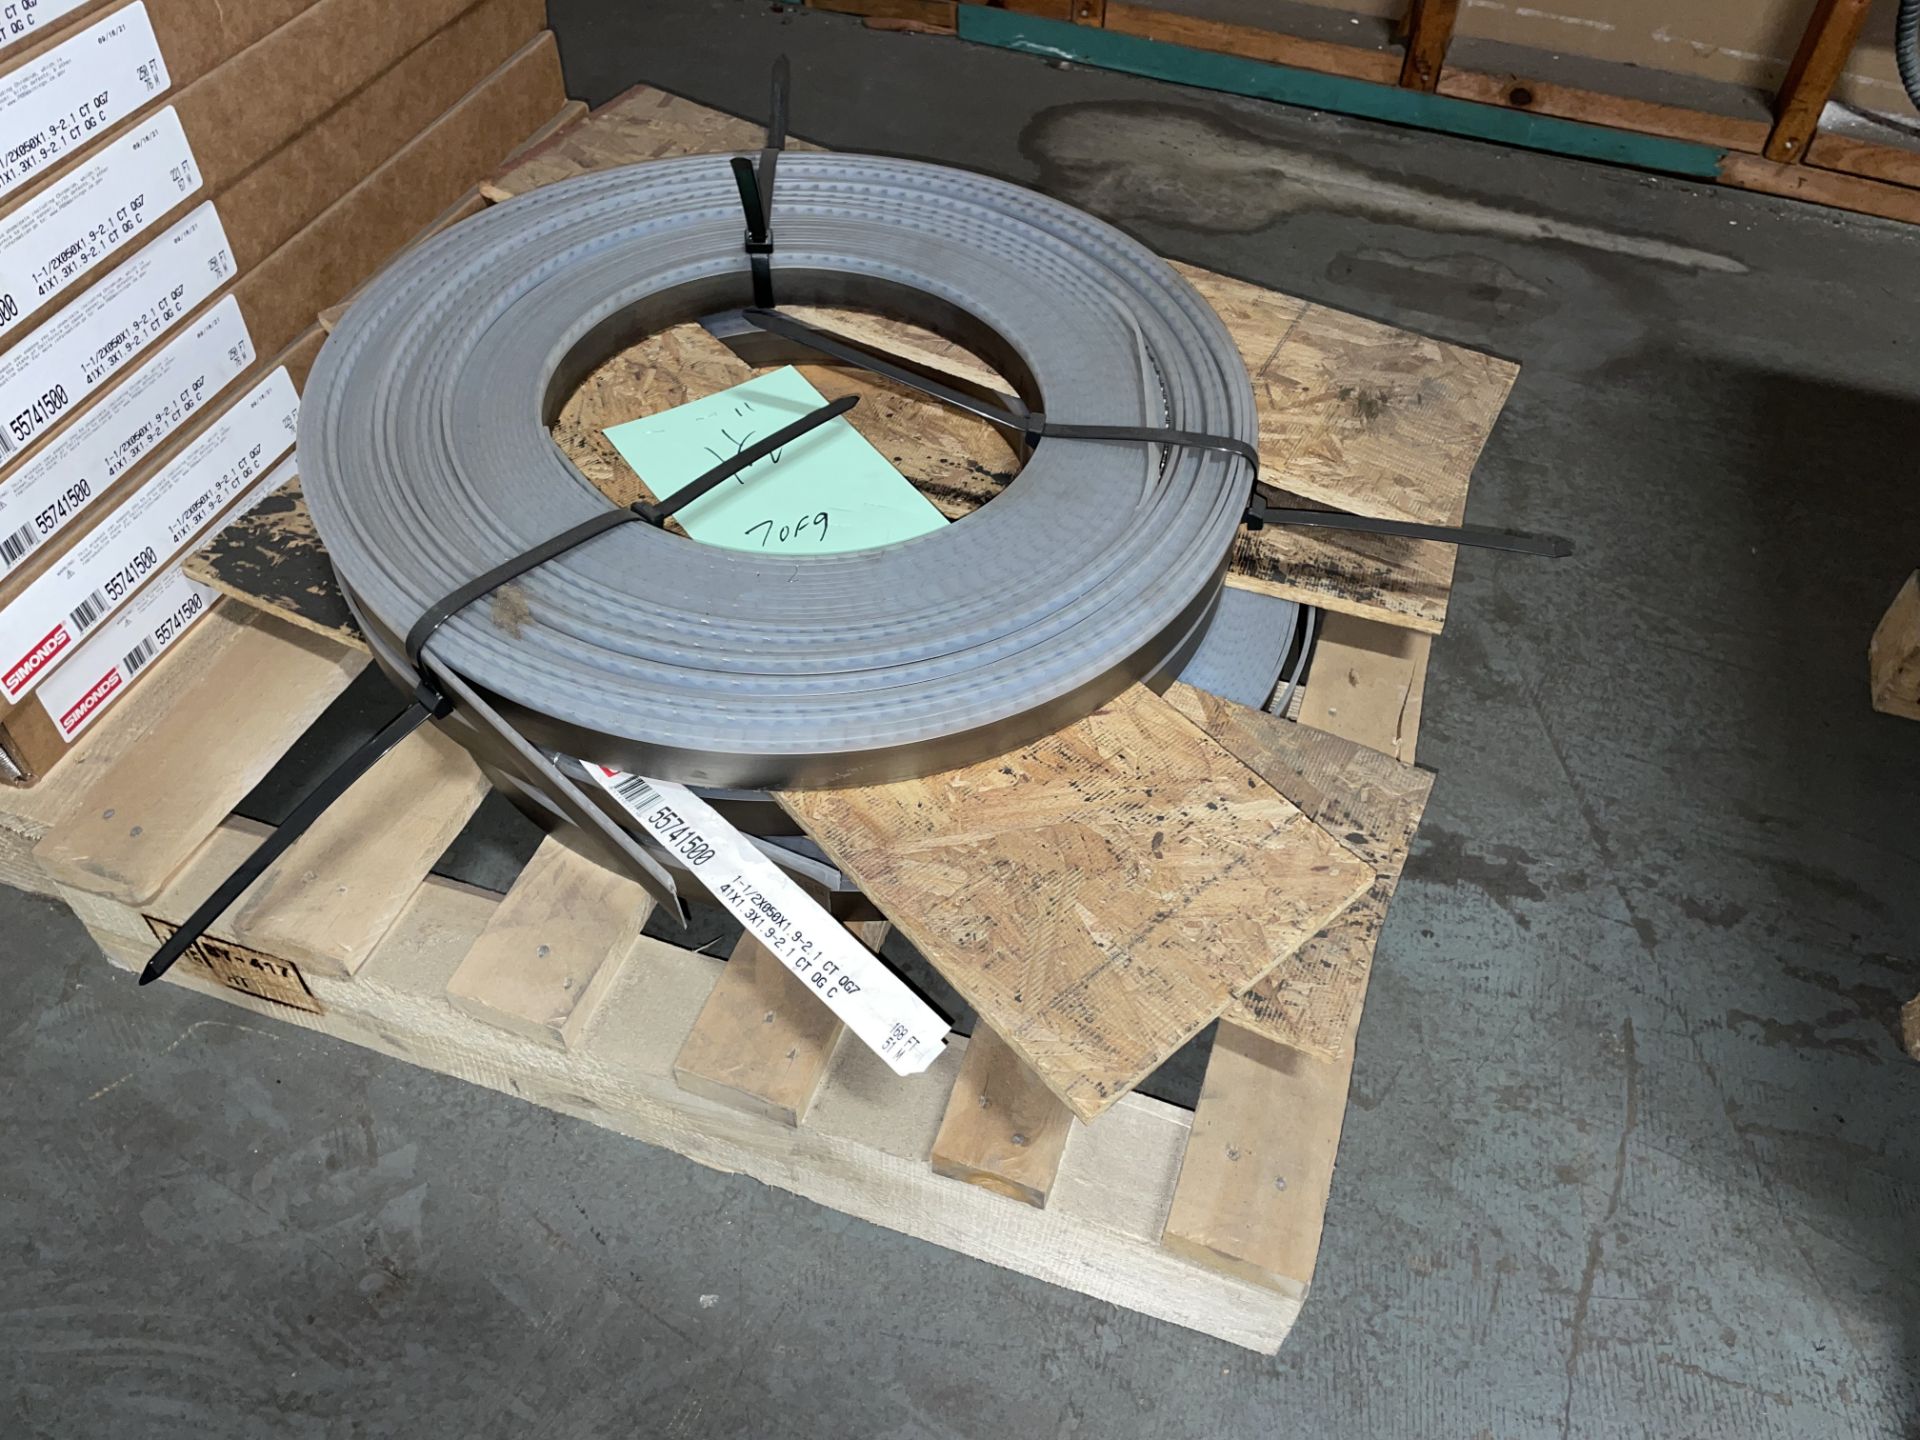 1-1/2” Carbide tipped bandsaw blade coil stock (non-conforming) - Image 6 of 8